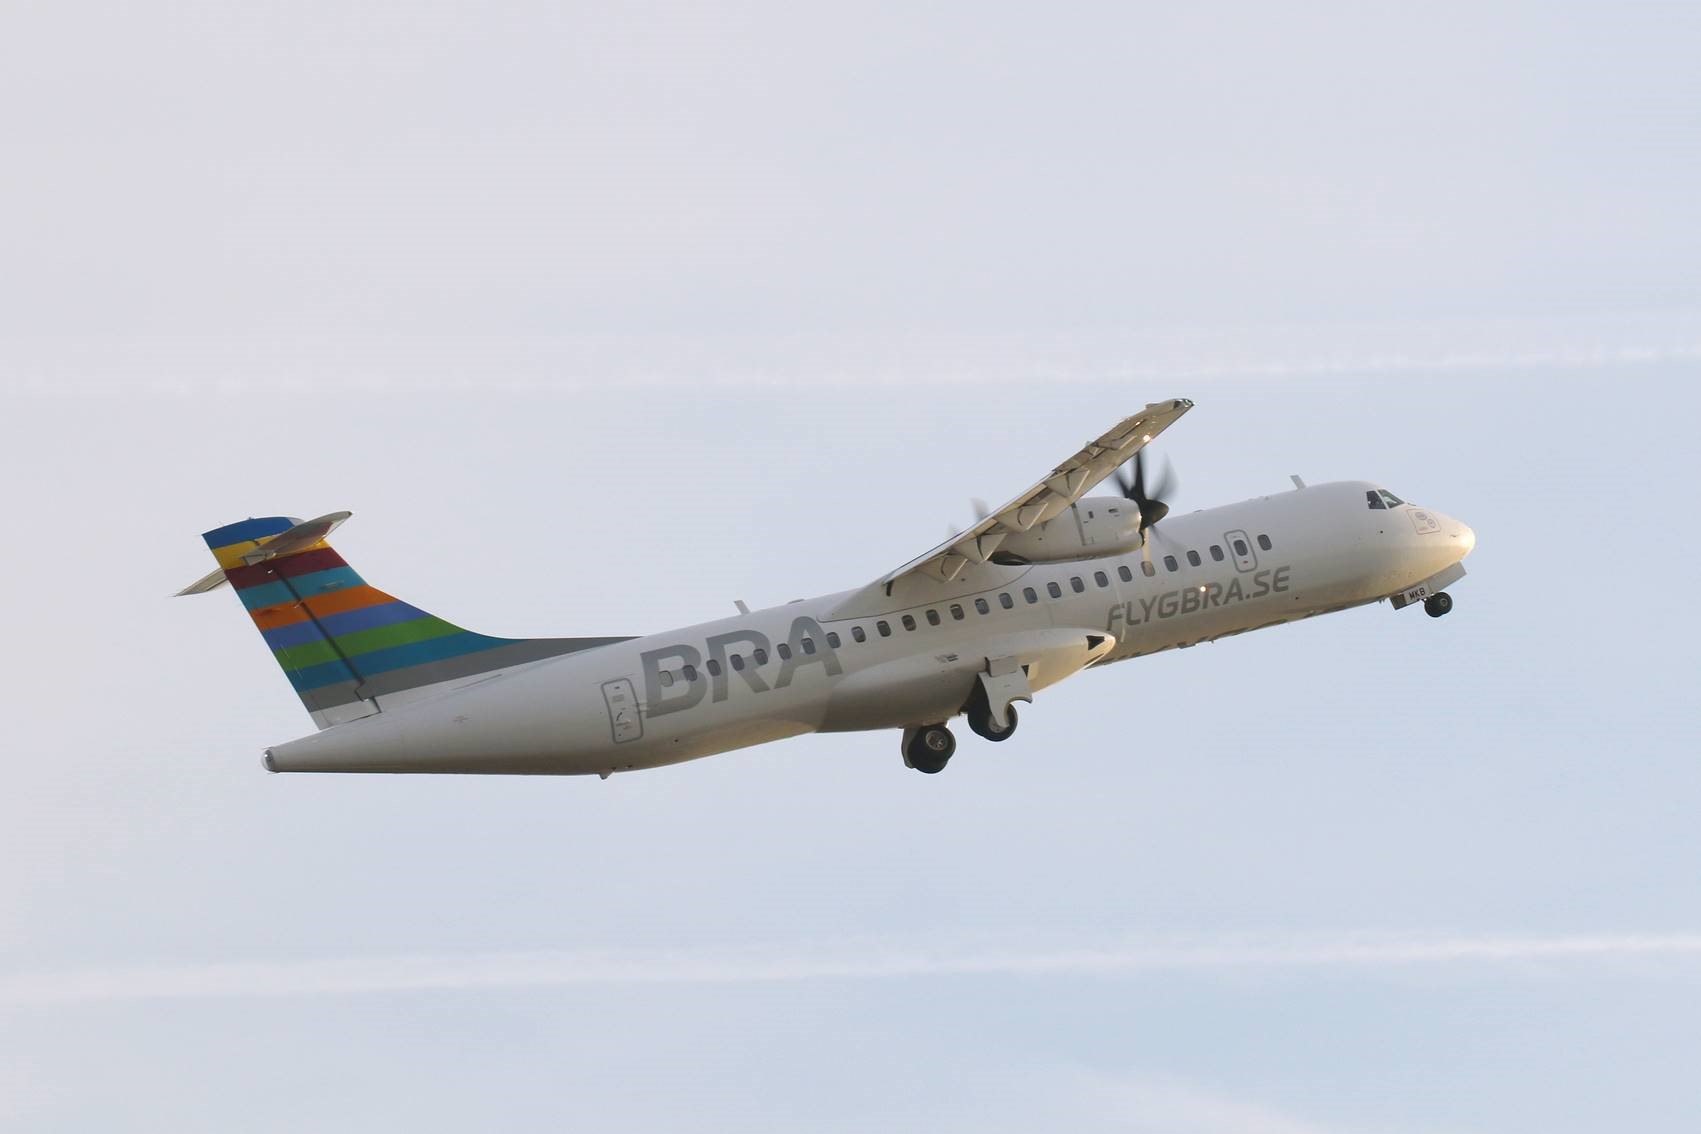 ATR and Braathens Regional Airlines partner with Neste to accelerate 100% SAF certification